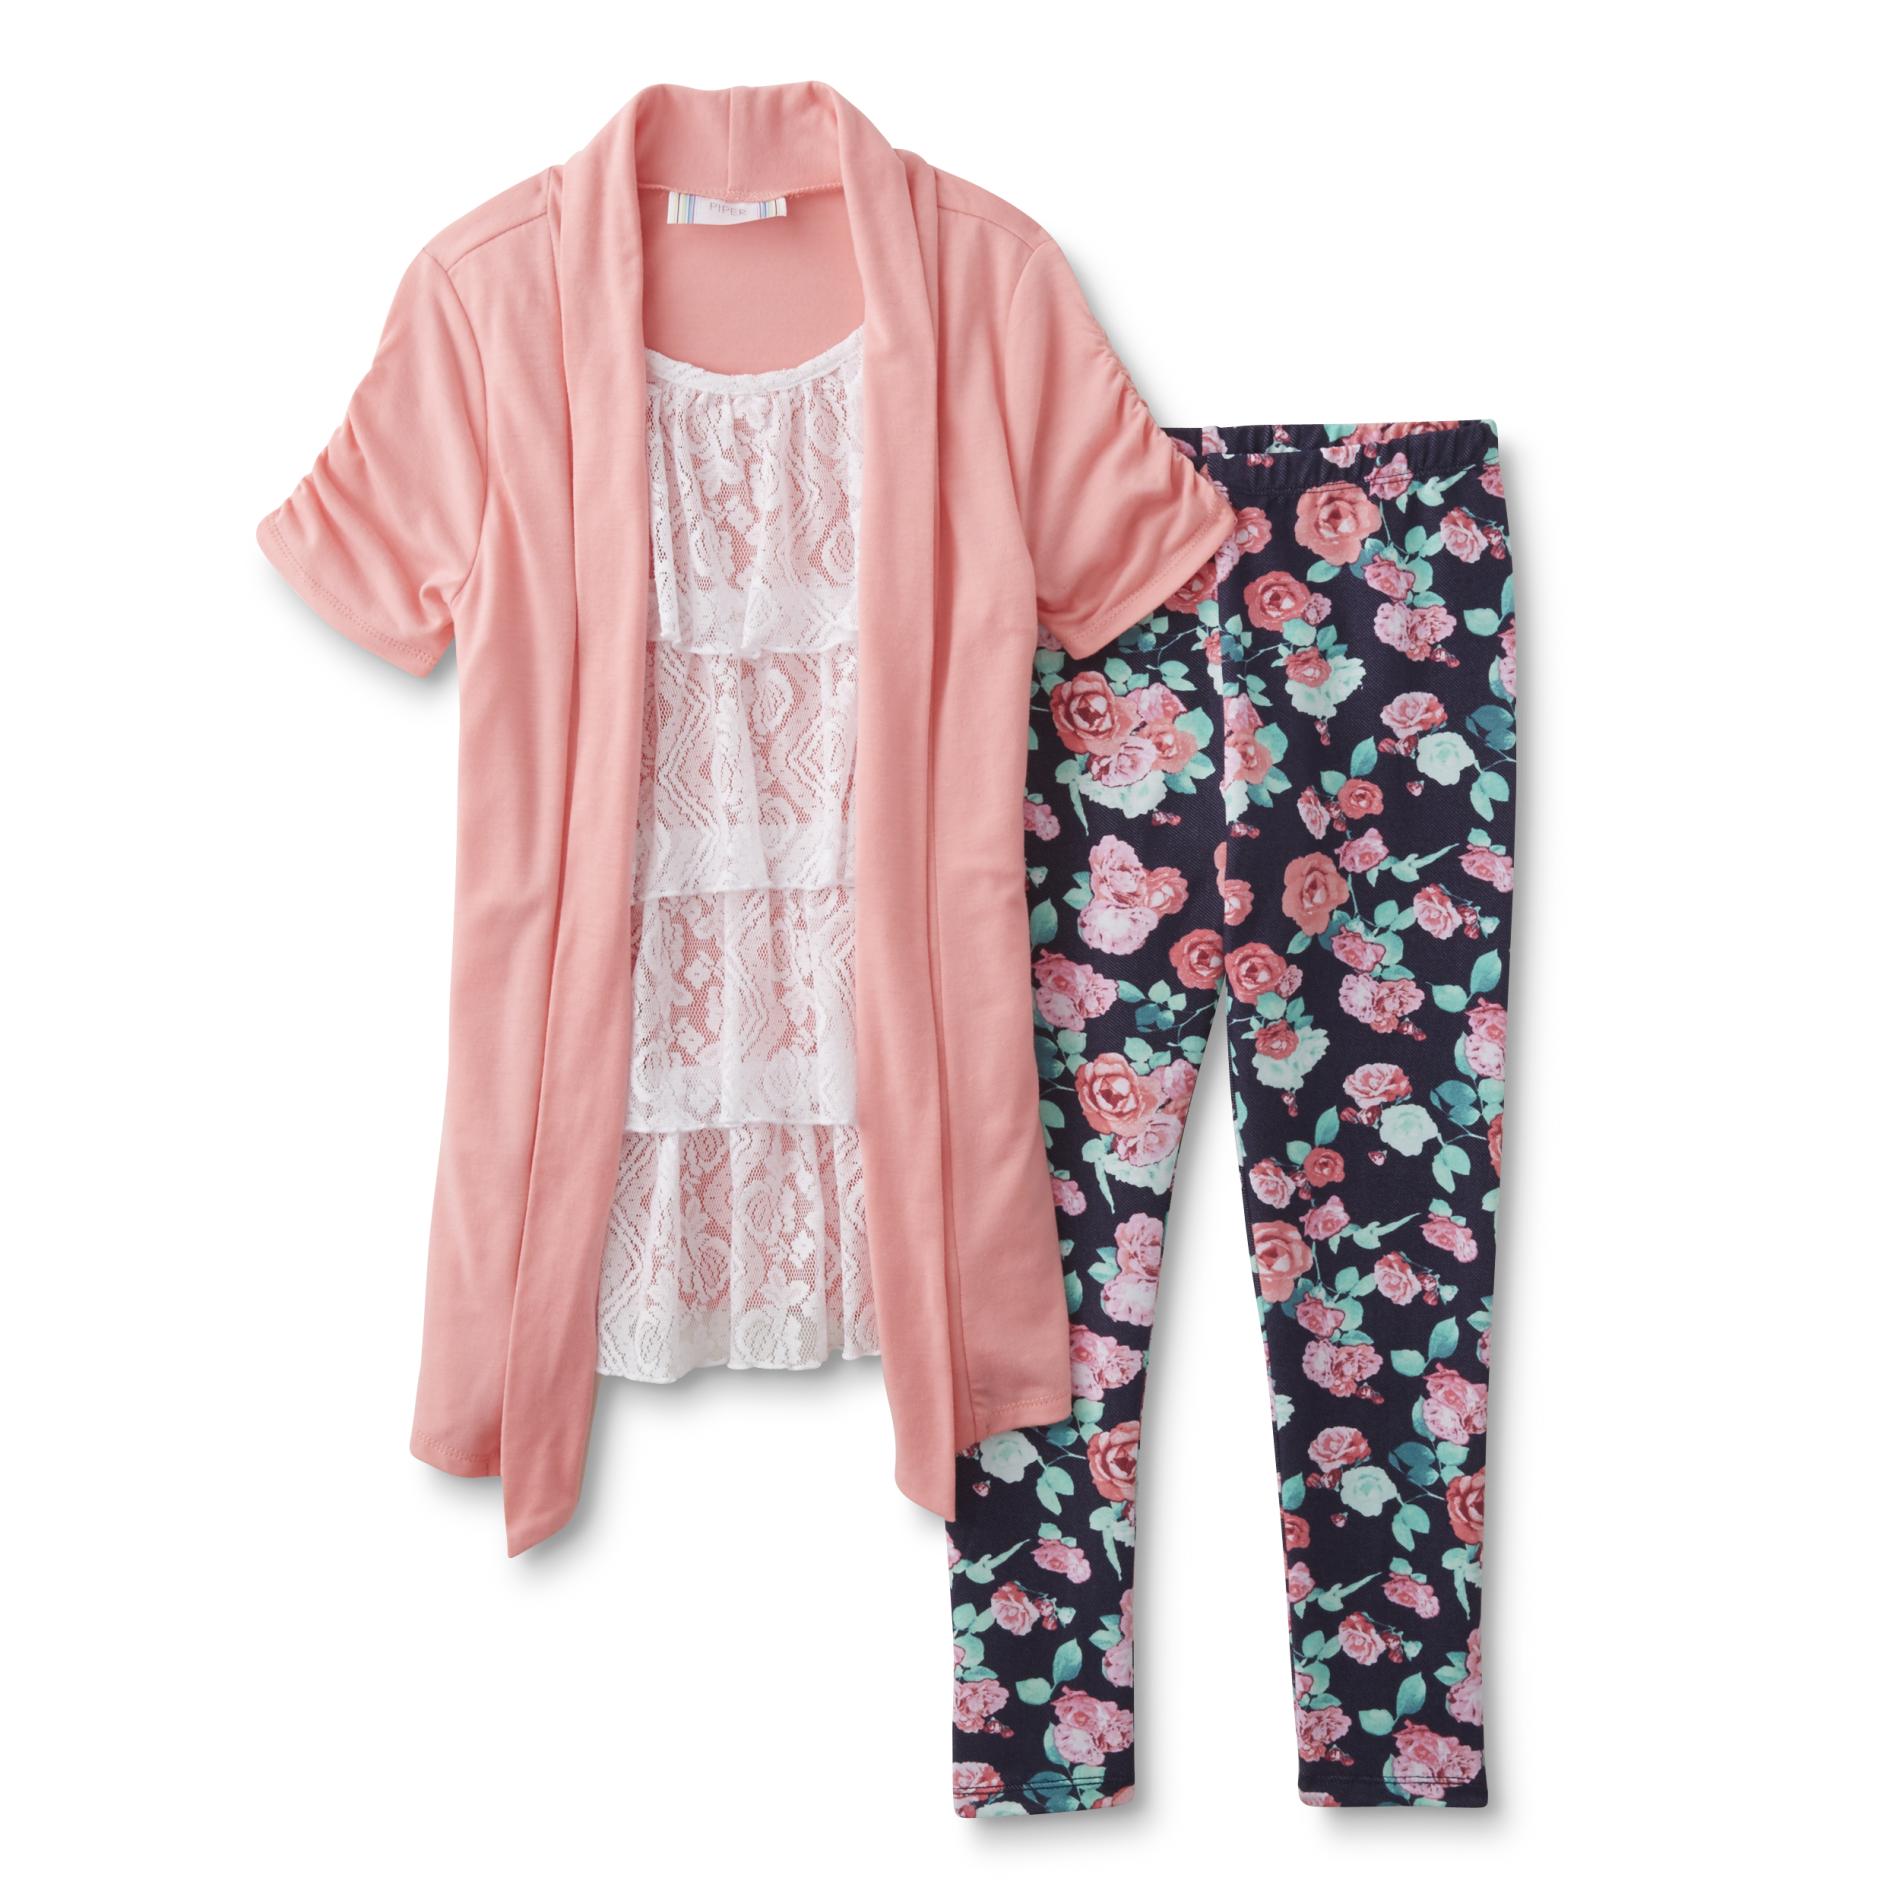 Piper Girl's Layered-Look Tunic & Leggings - Floral